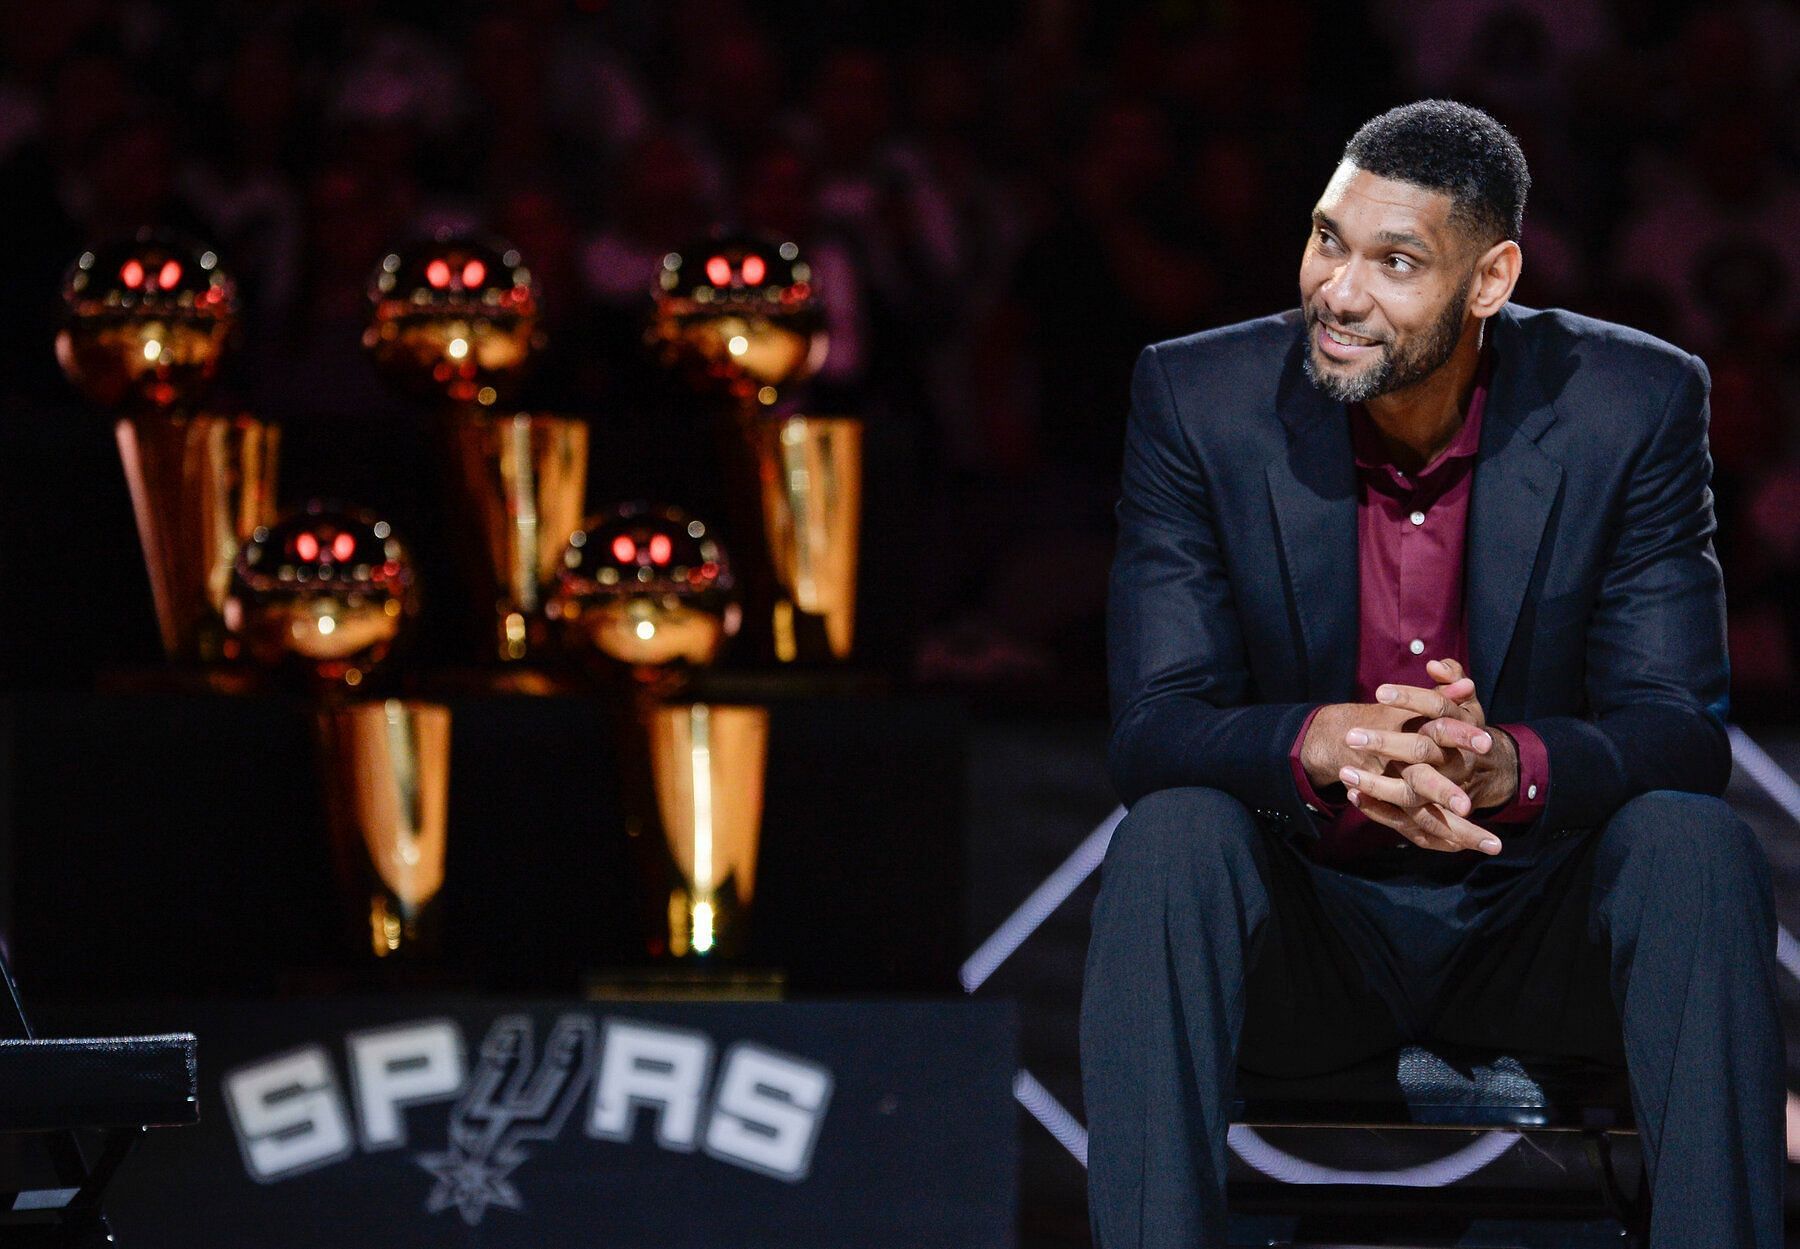 Tim Duncan is the yardstick by which all power forwards are measured. [photo: New York Times]